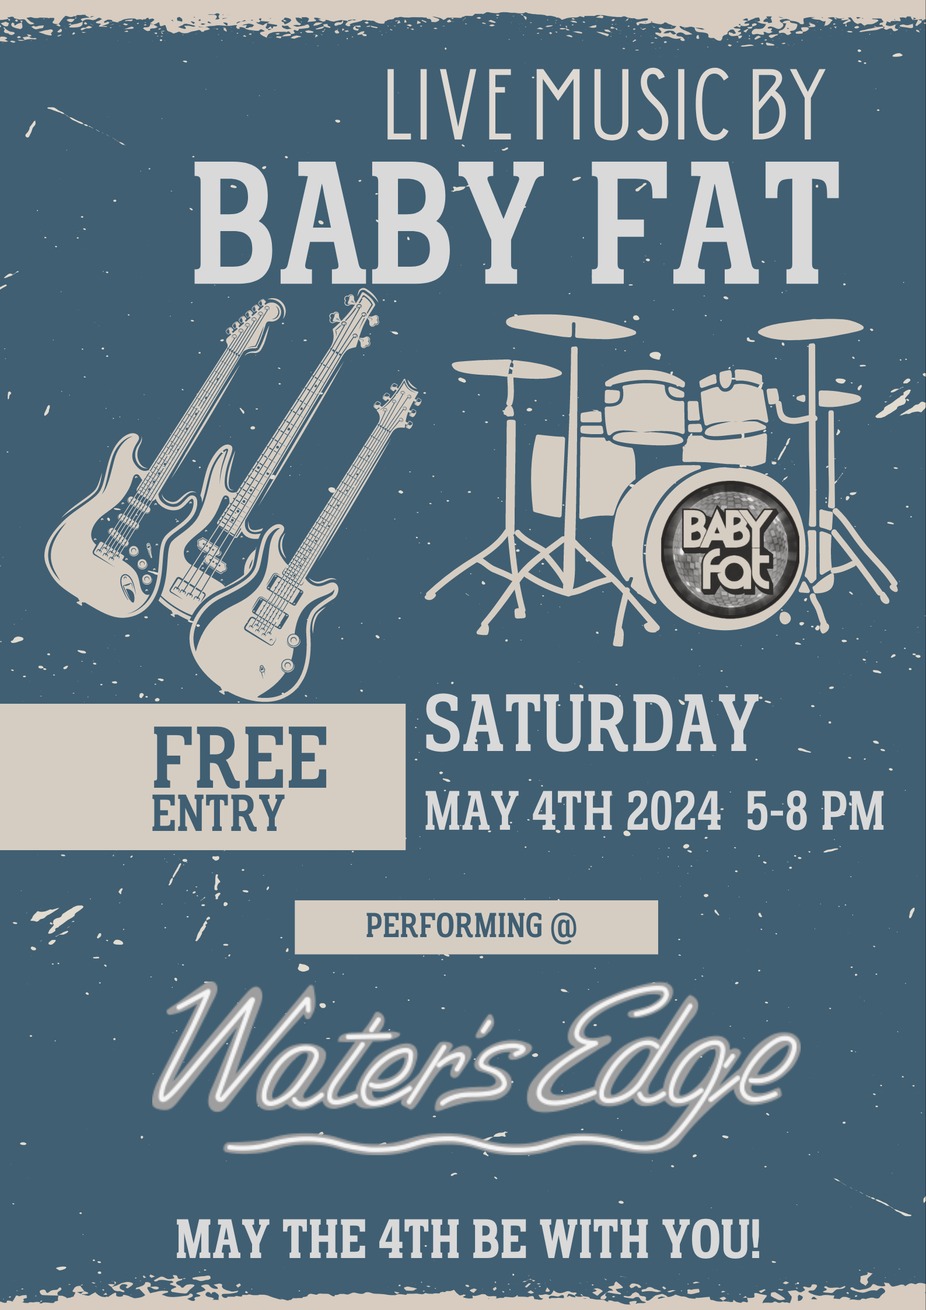 Baby Fat event photo